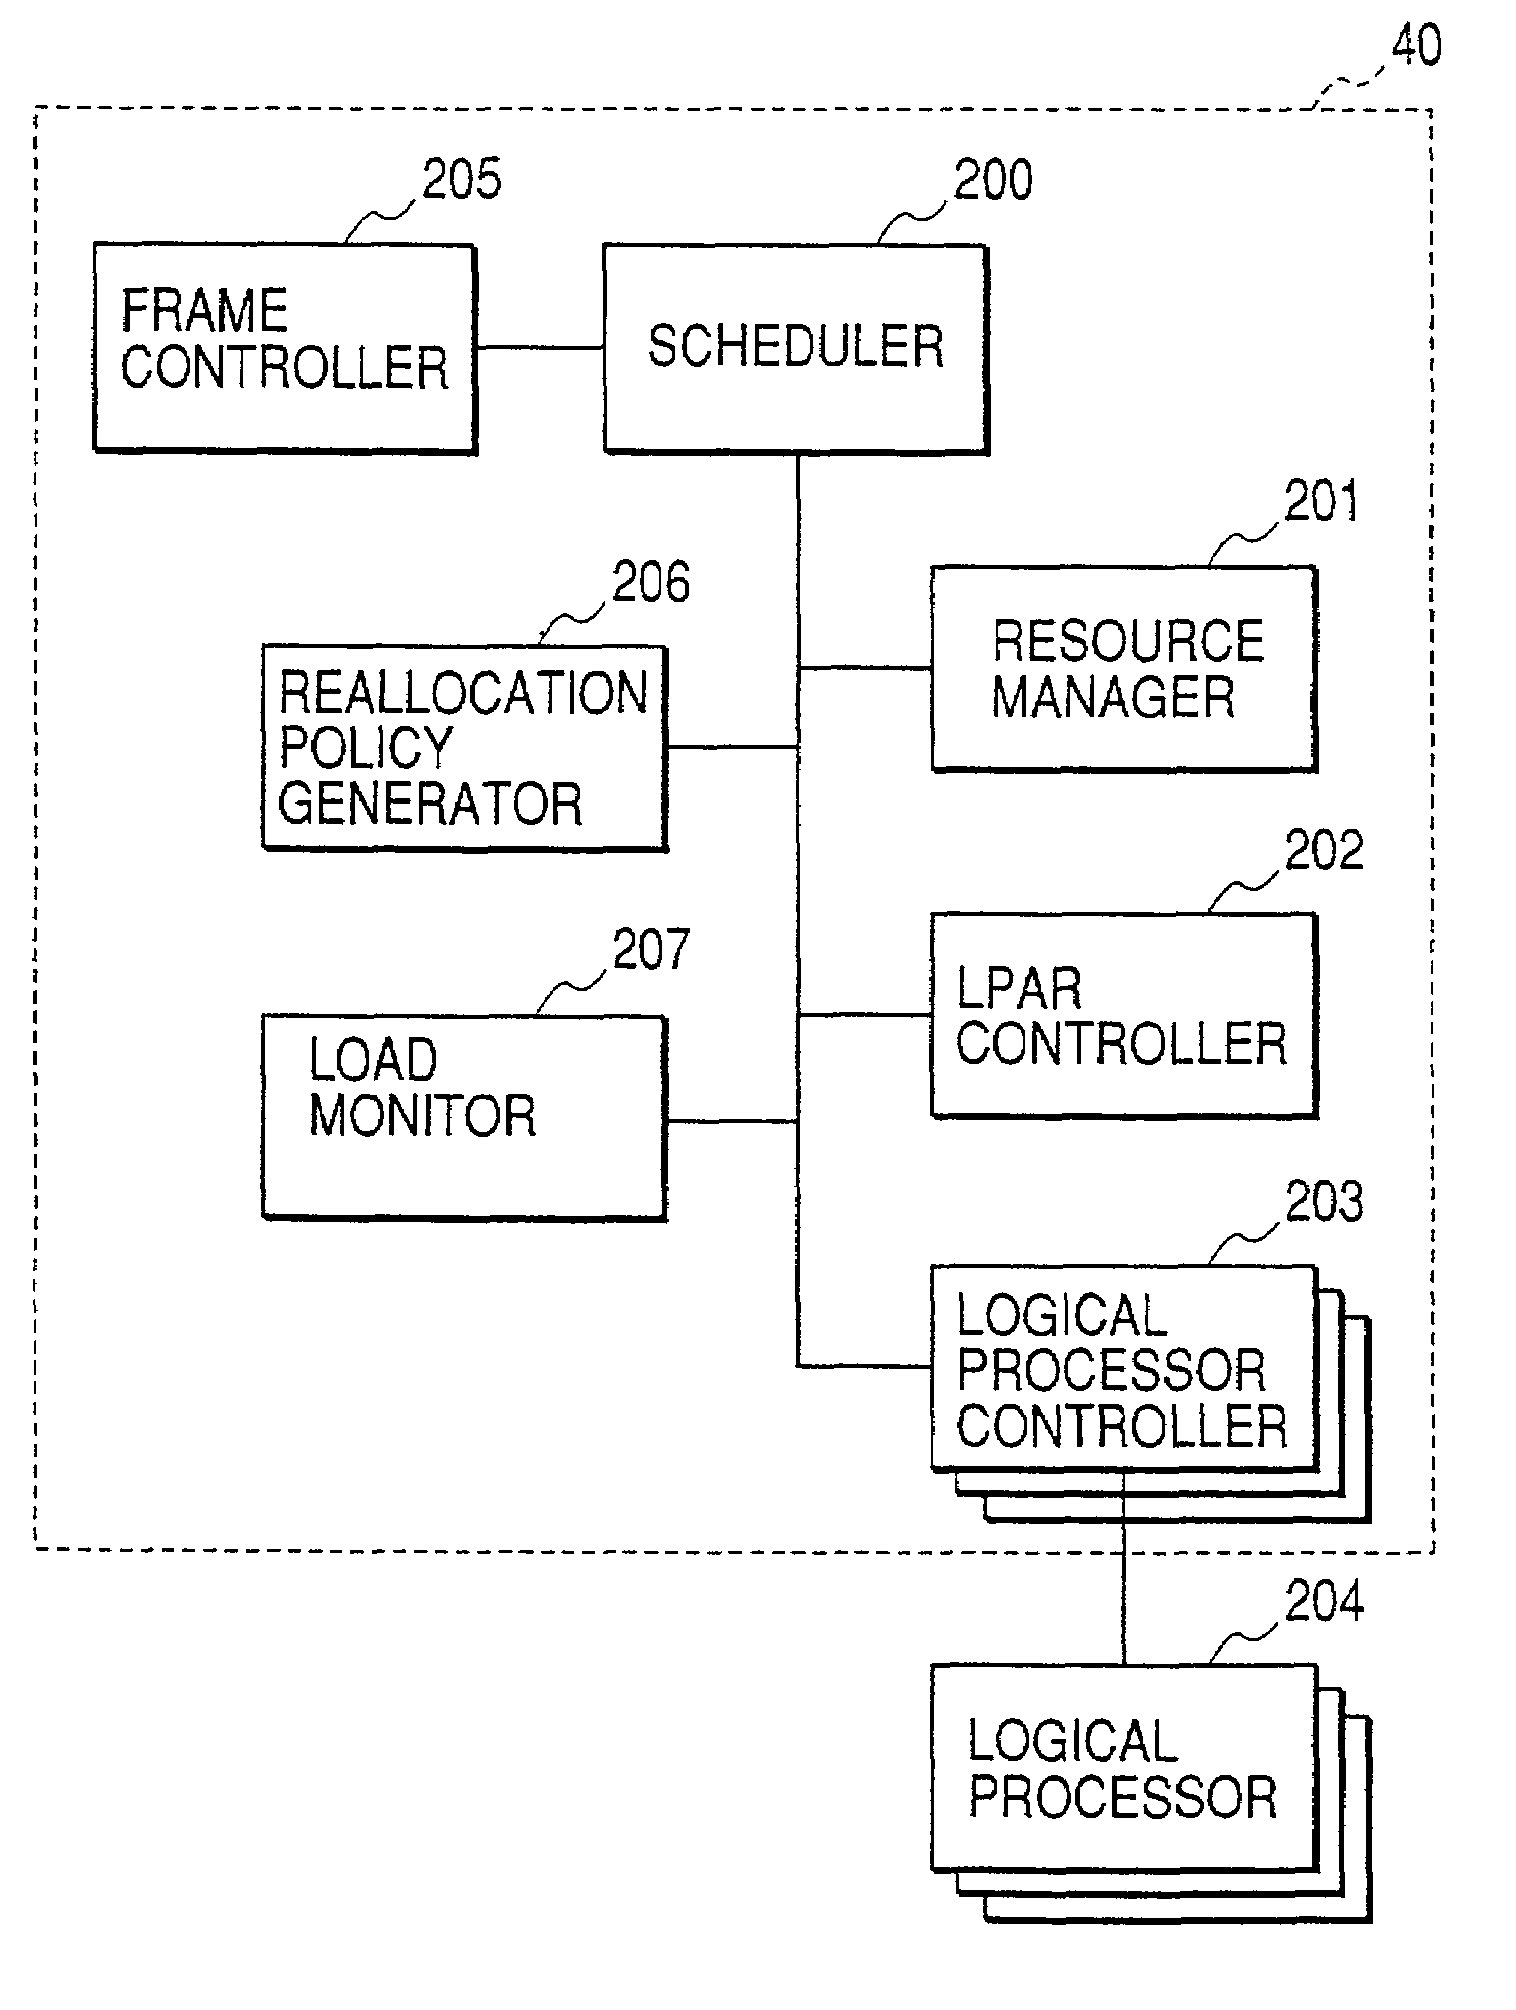 Virtual computer system with dynamic resource reallocation